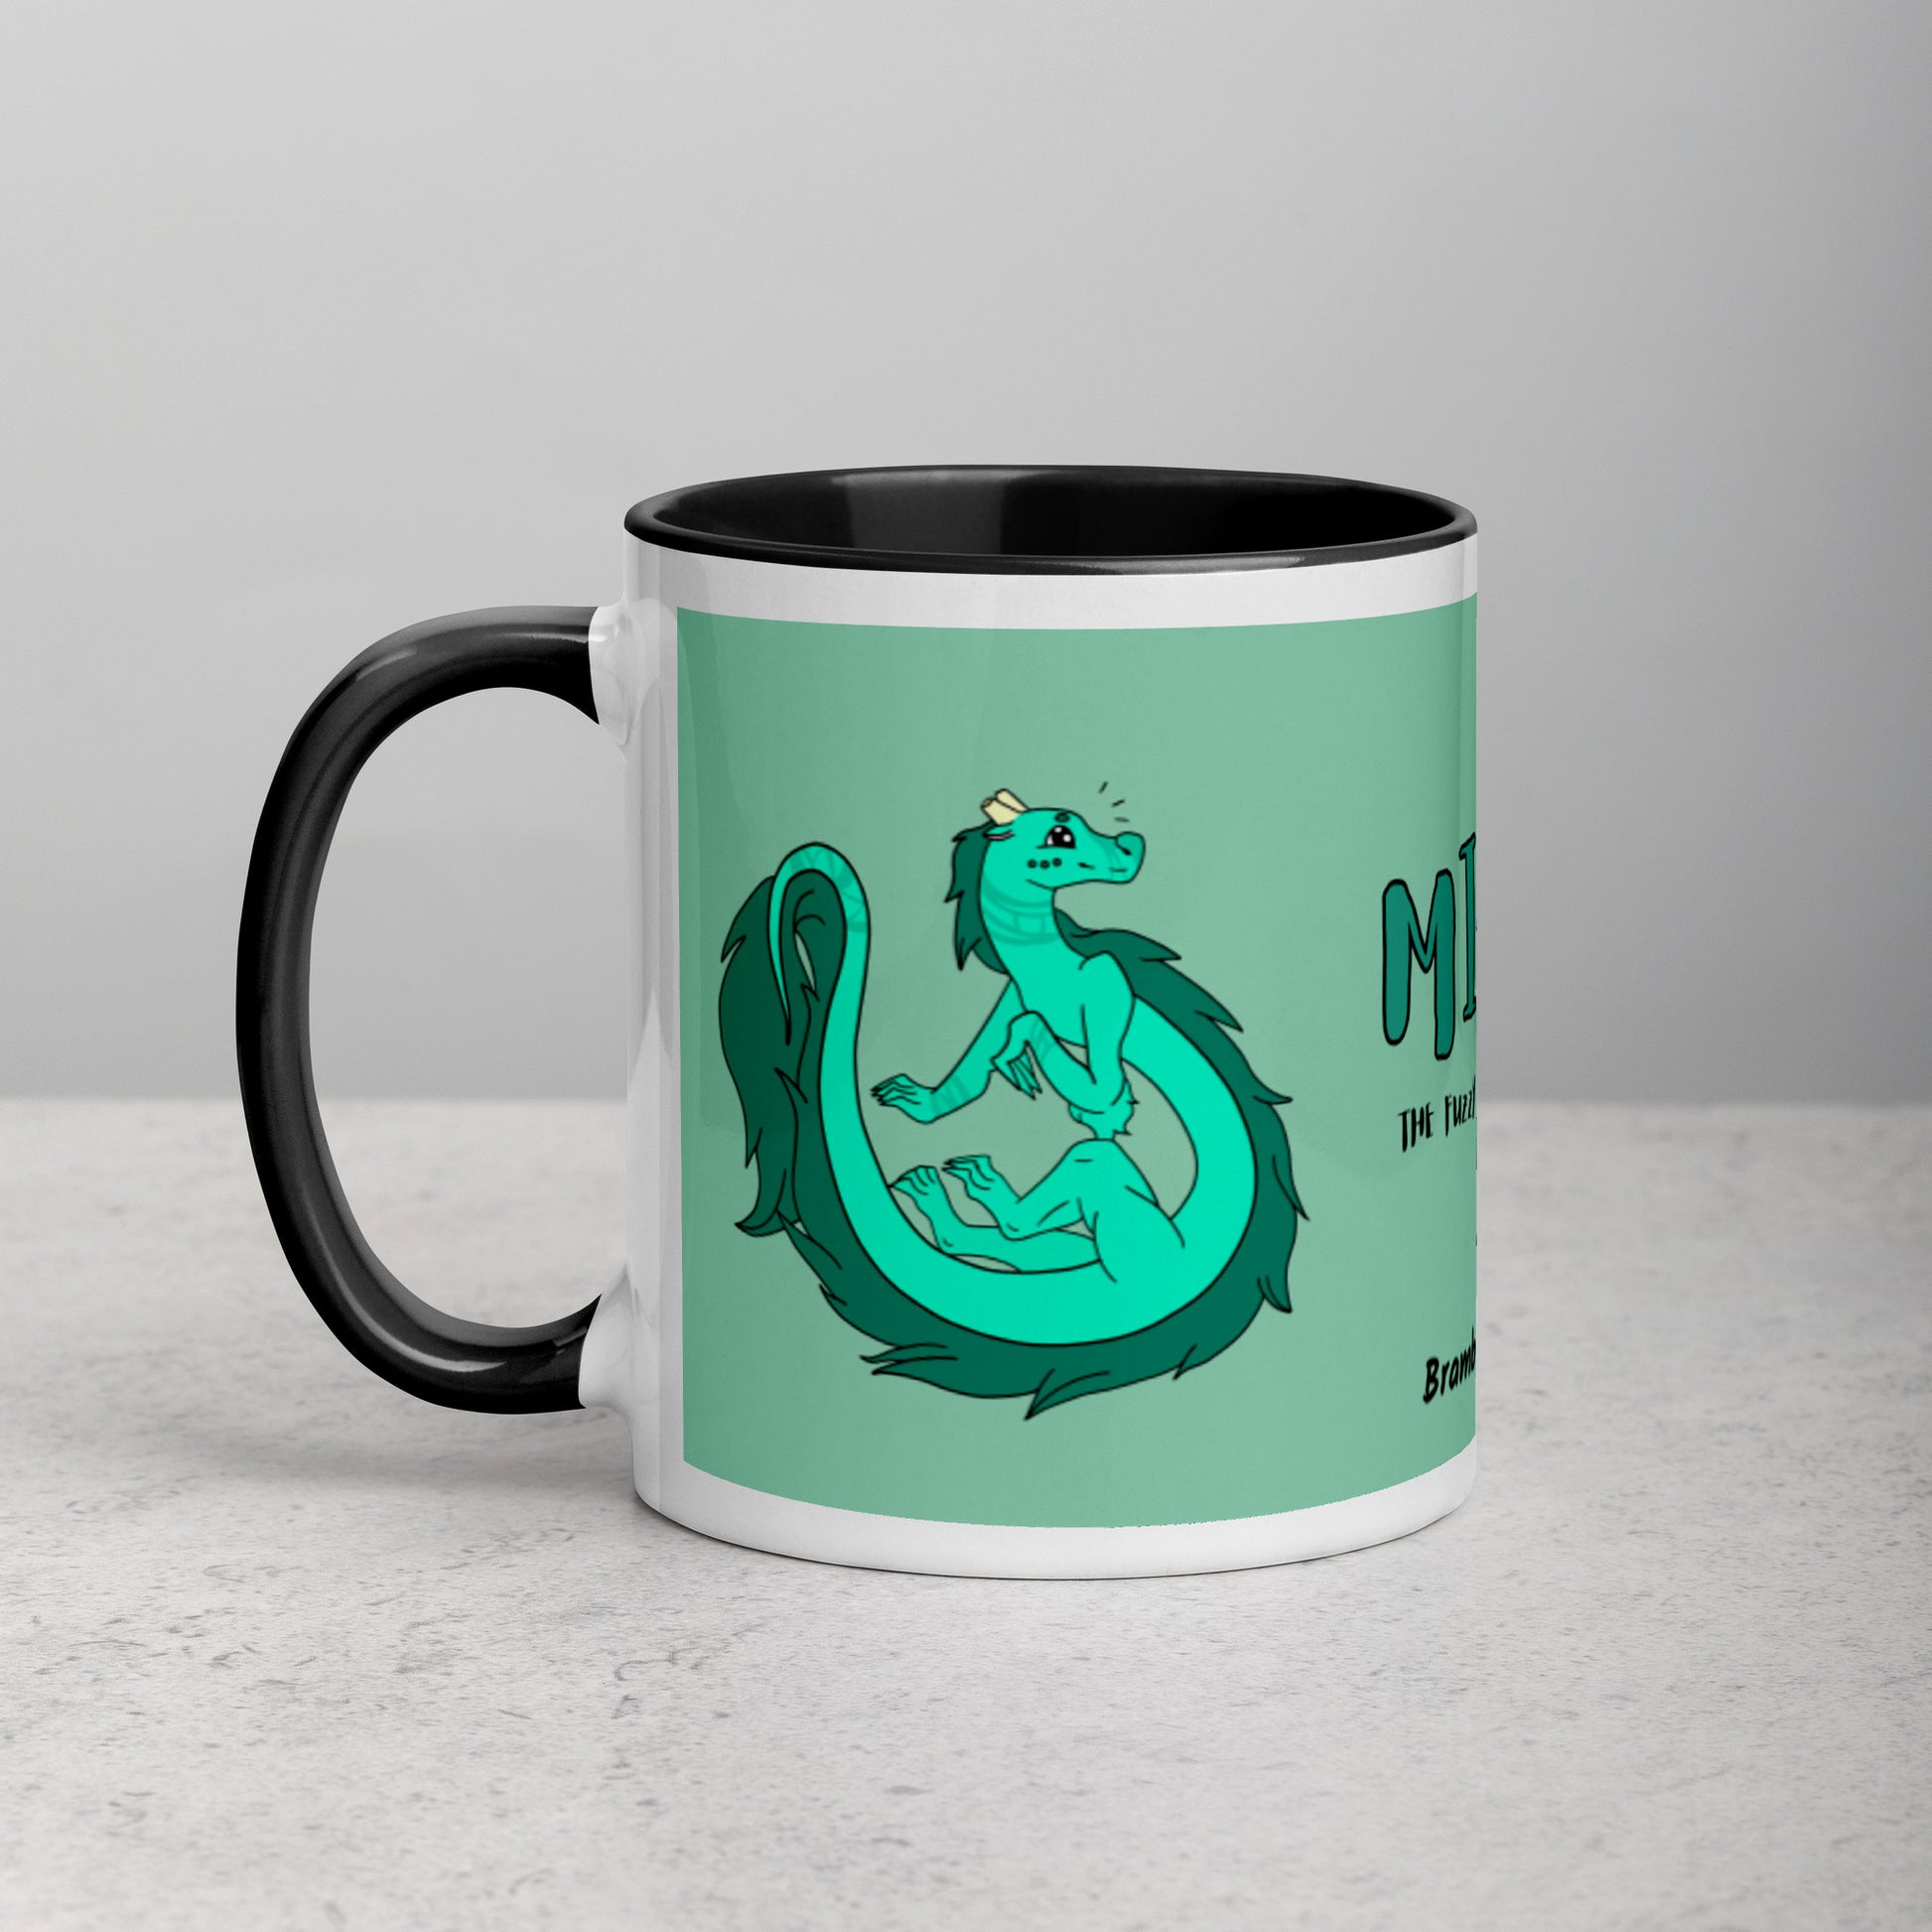 11 ounce white ceramic mug. Black inside and handle. Features double-sided image of Minty the Fuzzy Noodle Dragon on a green background. Shown on tabletop.